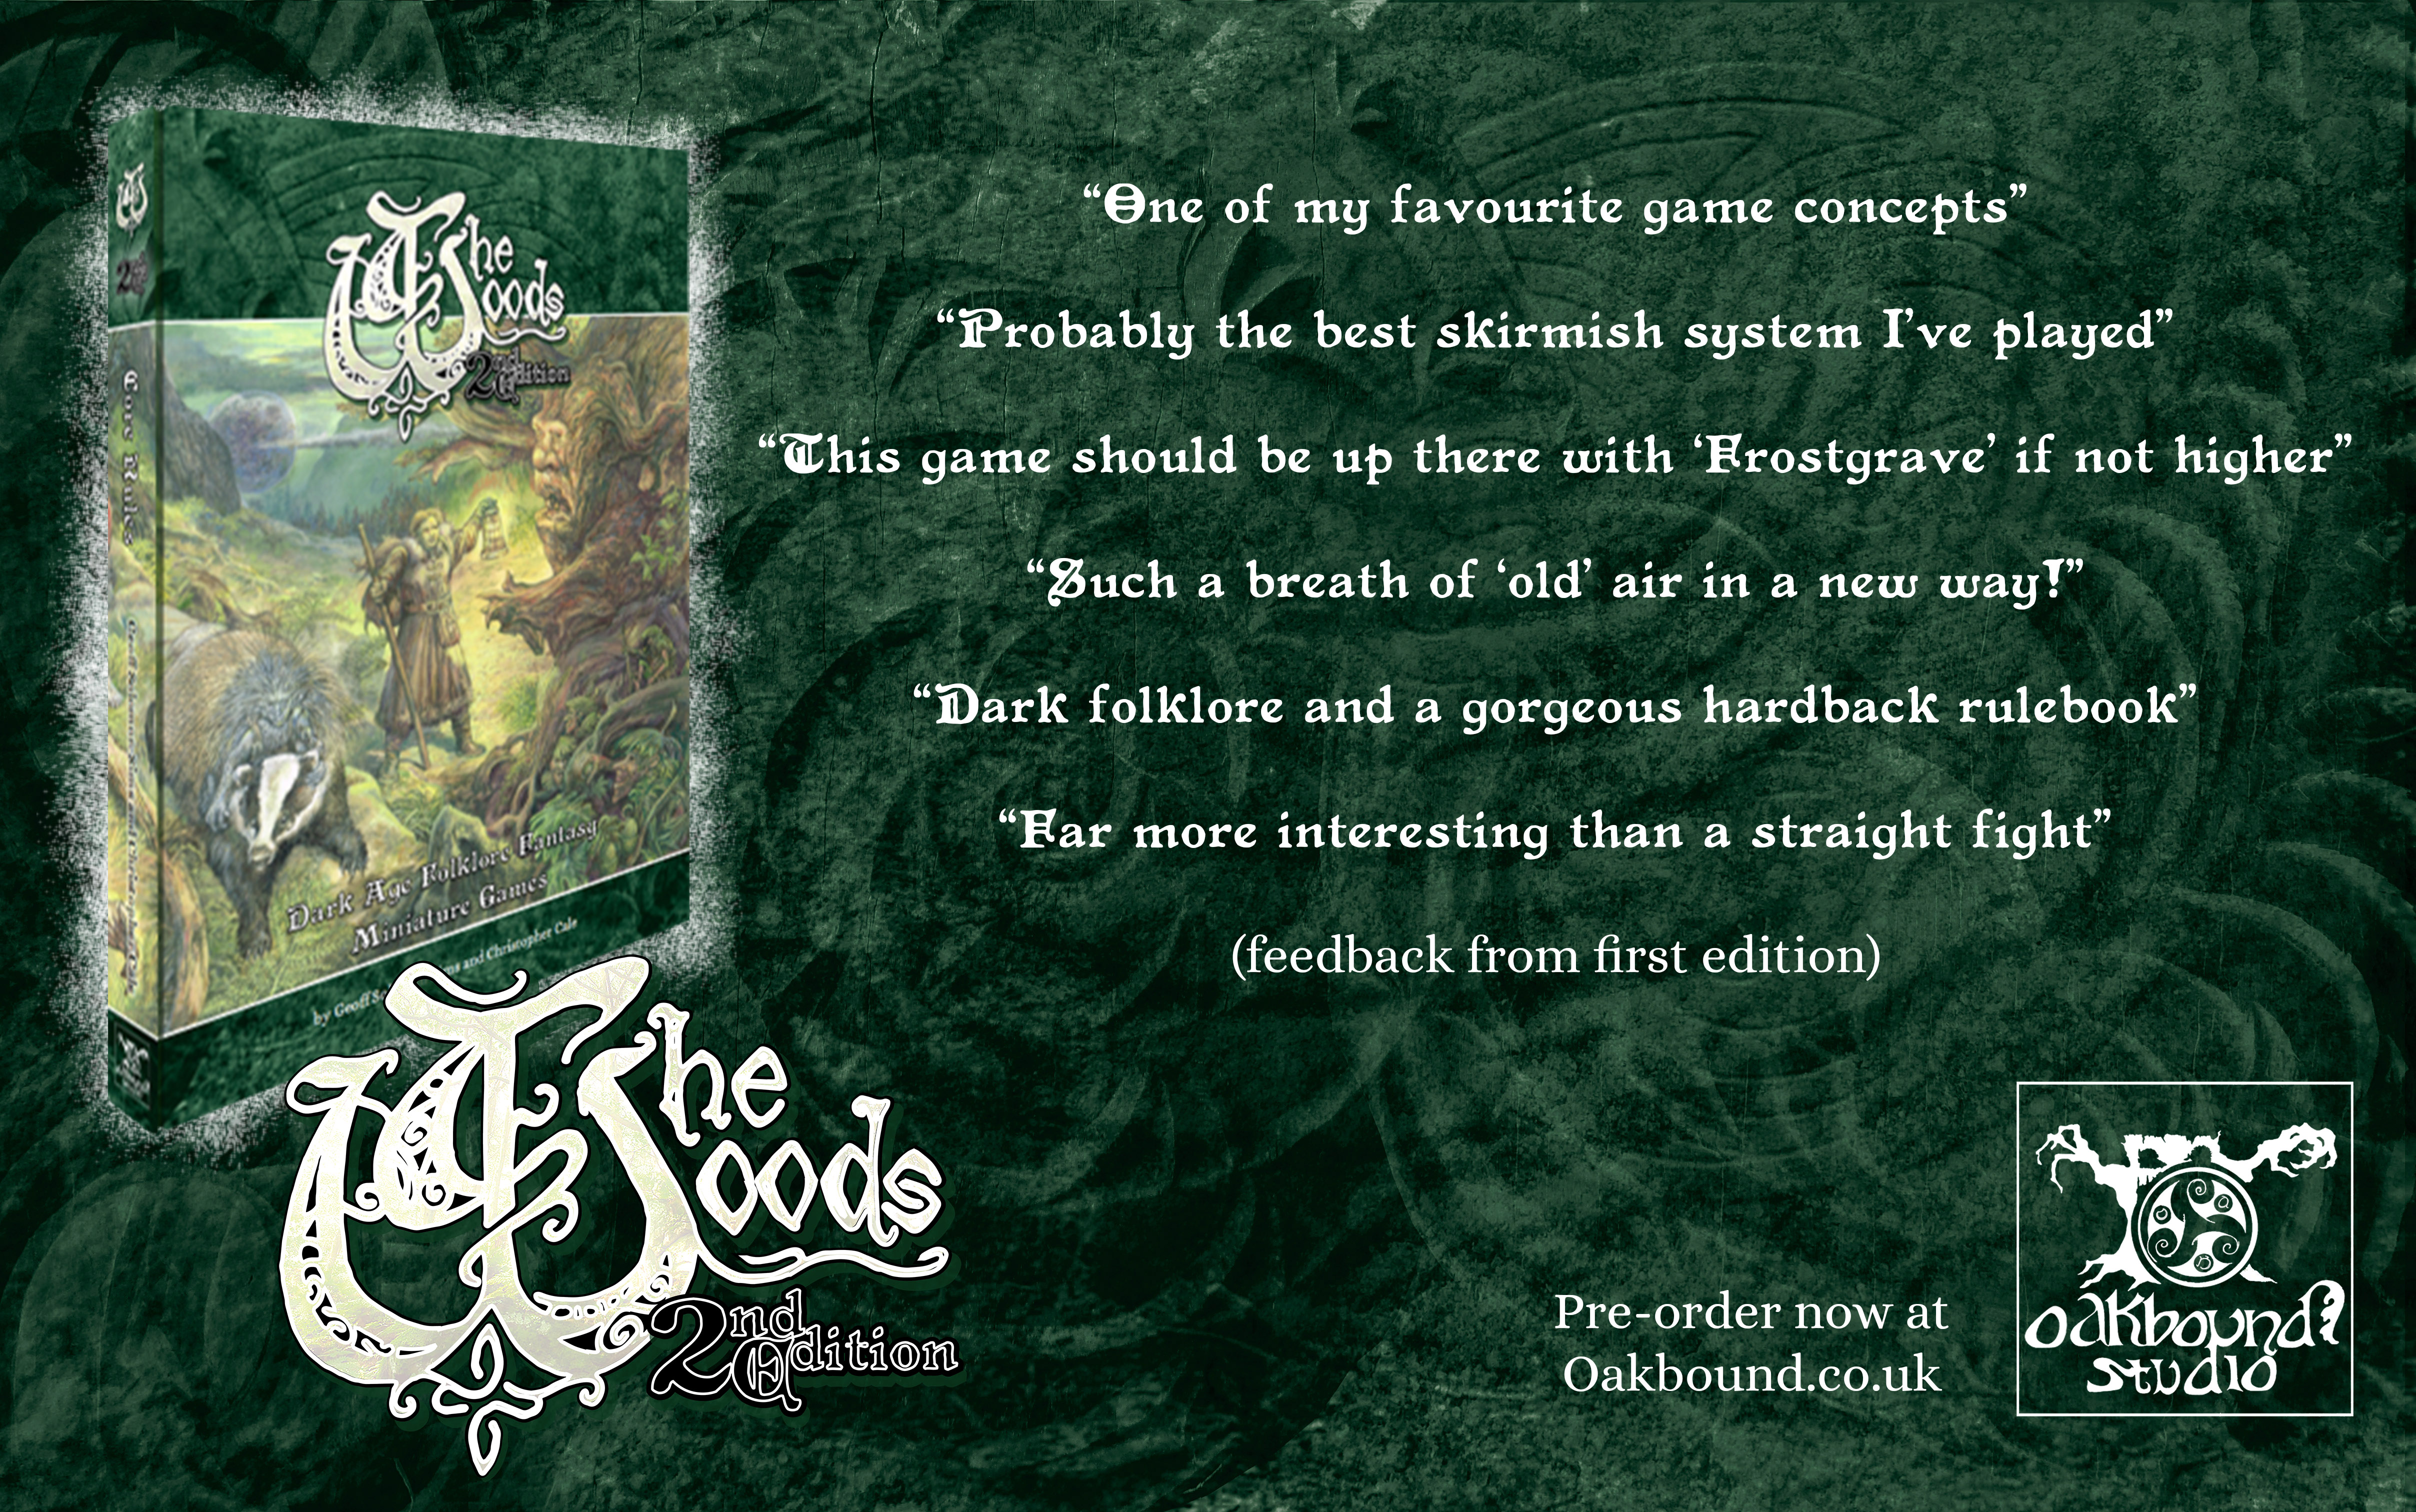 The Woods second edition prepares for launch